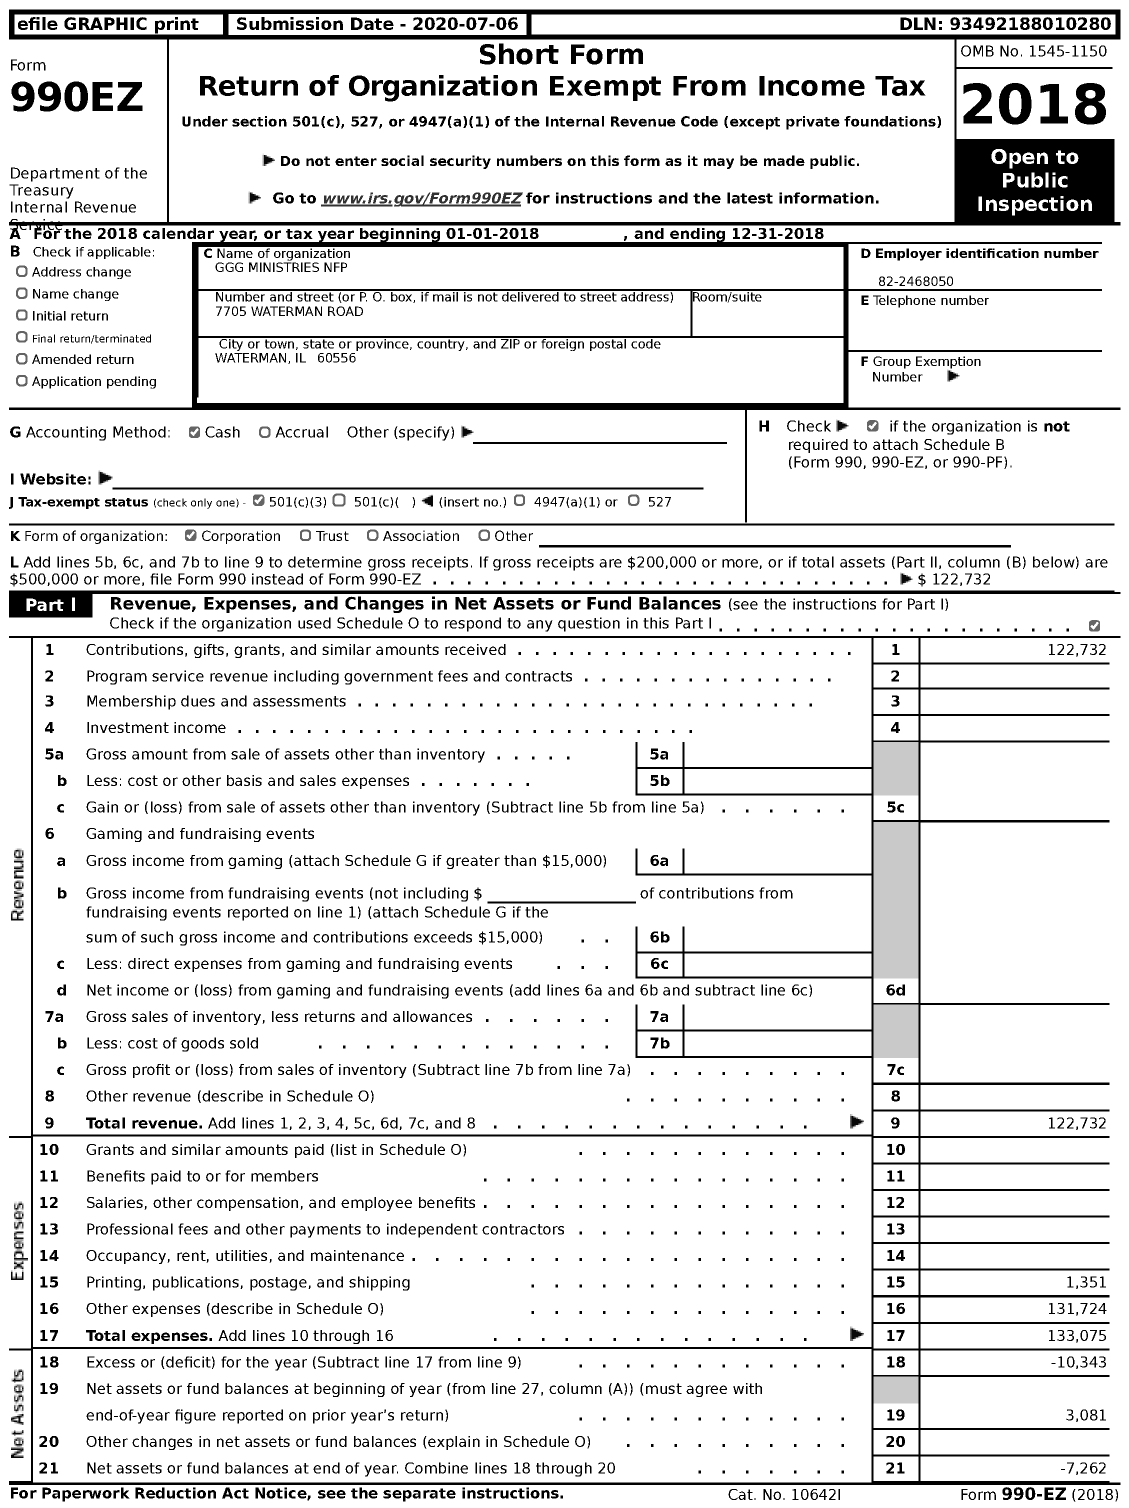 Image of first page of 2018 Form 990EZ for GGG Ministries NFP